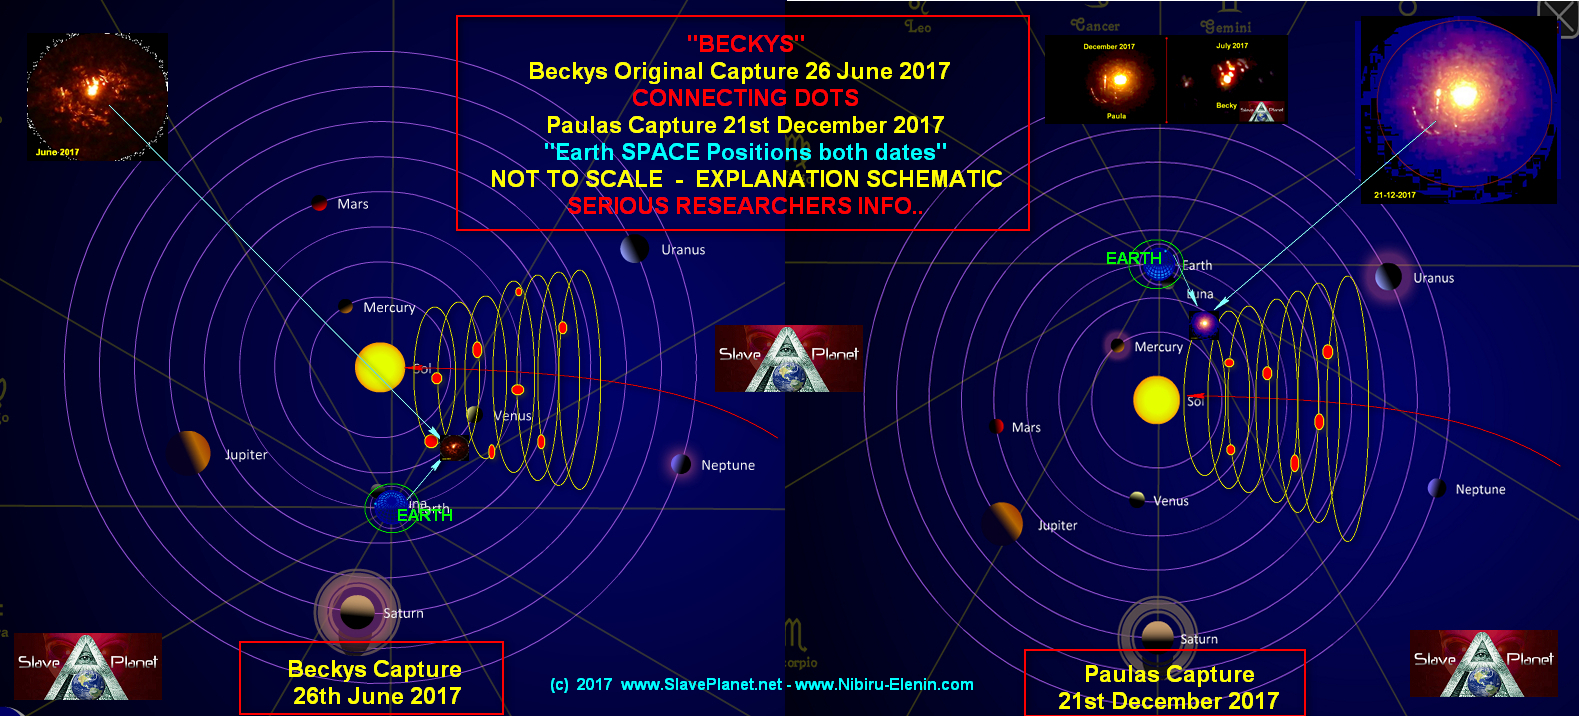 3 Planet X System BECKYS 4th Capture INVESTIGATED